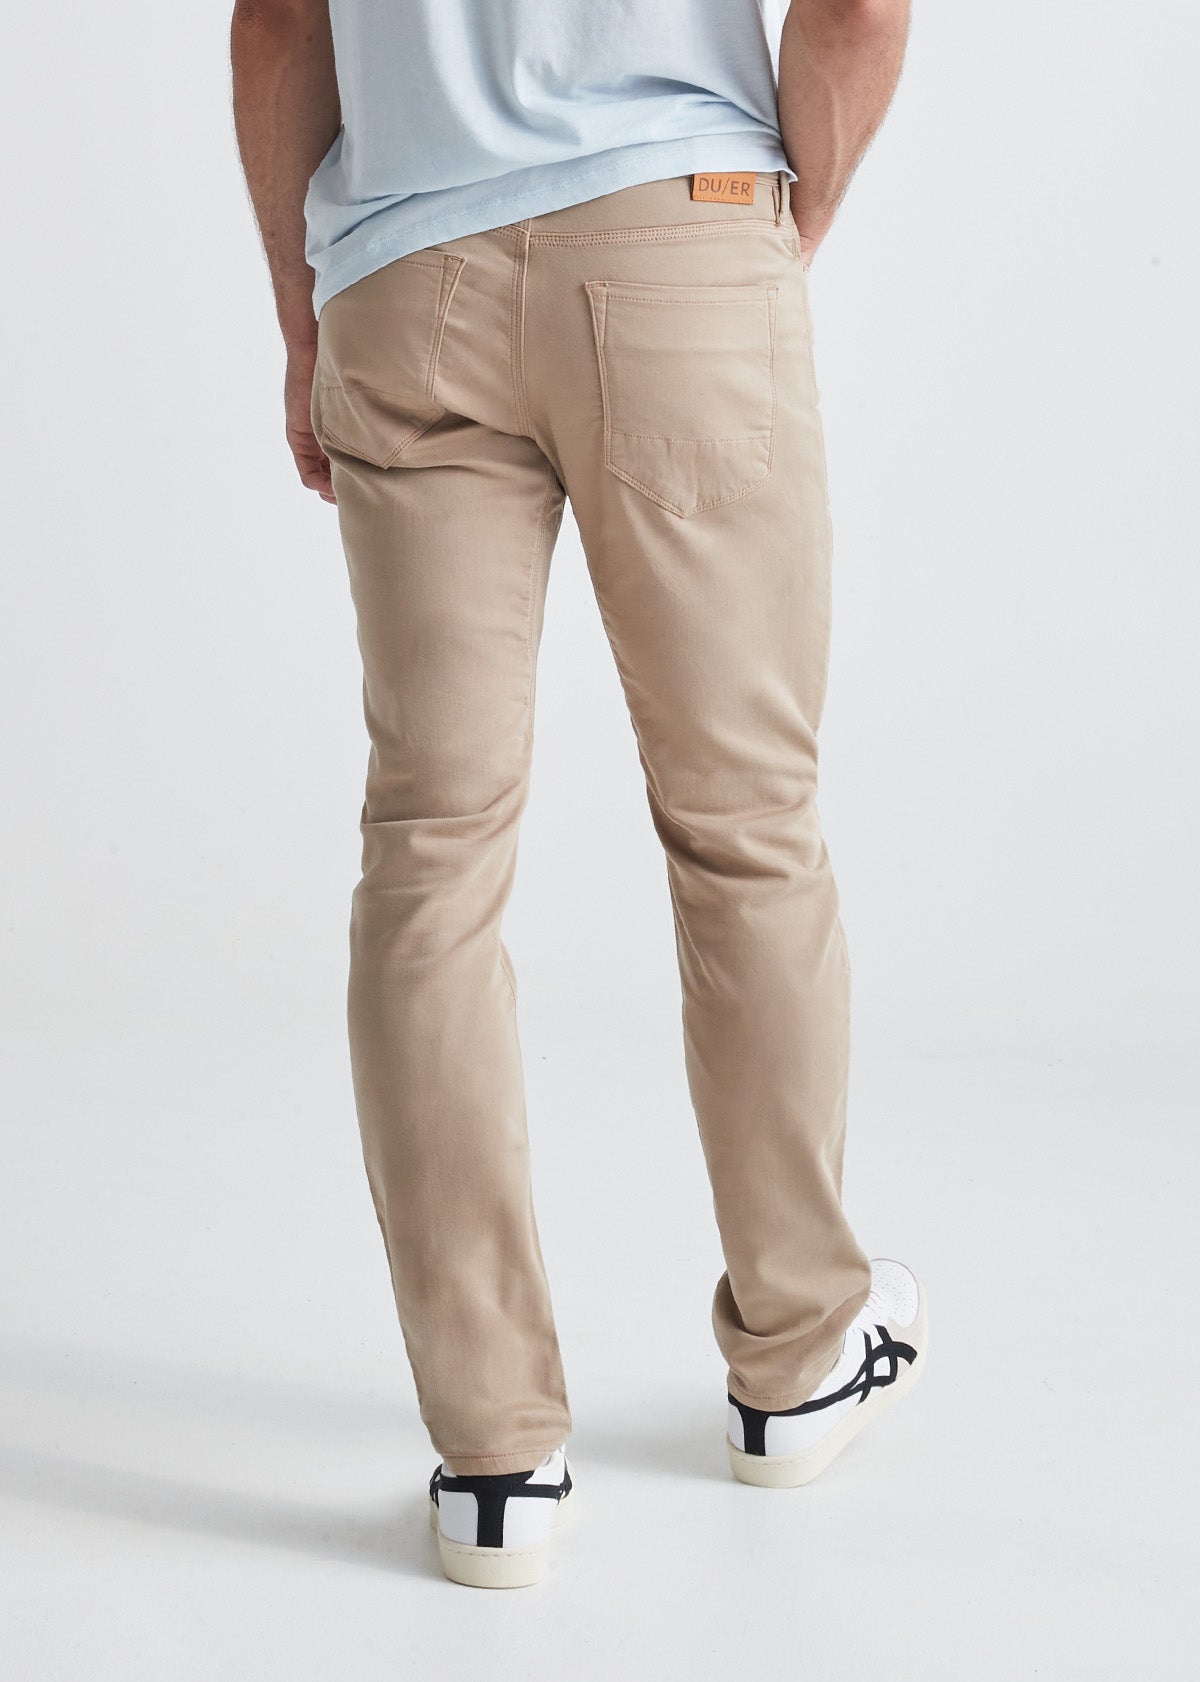 Women's Stretch Woven High-Rise Taper Pants - All In Motion™ Light Beige L